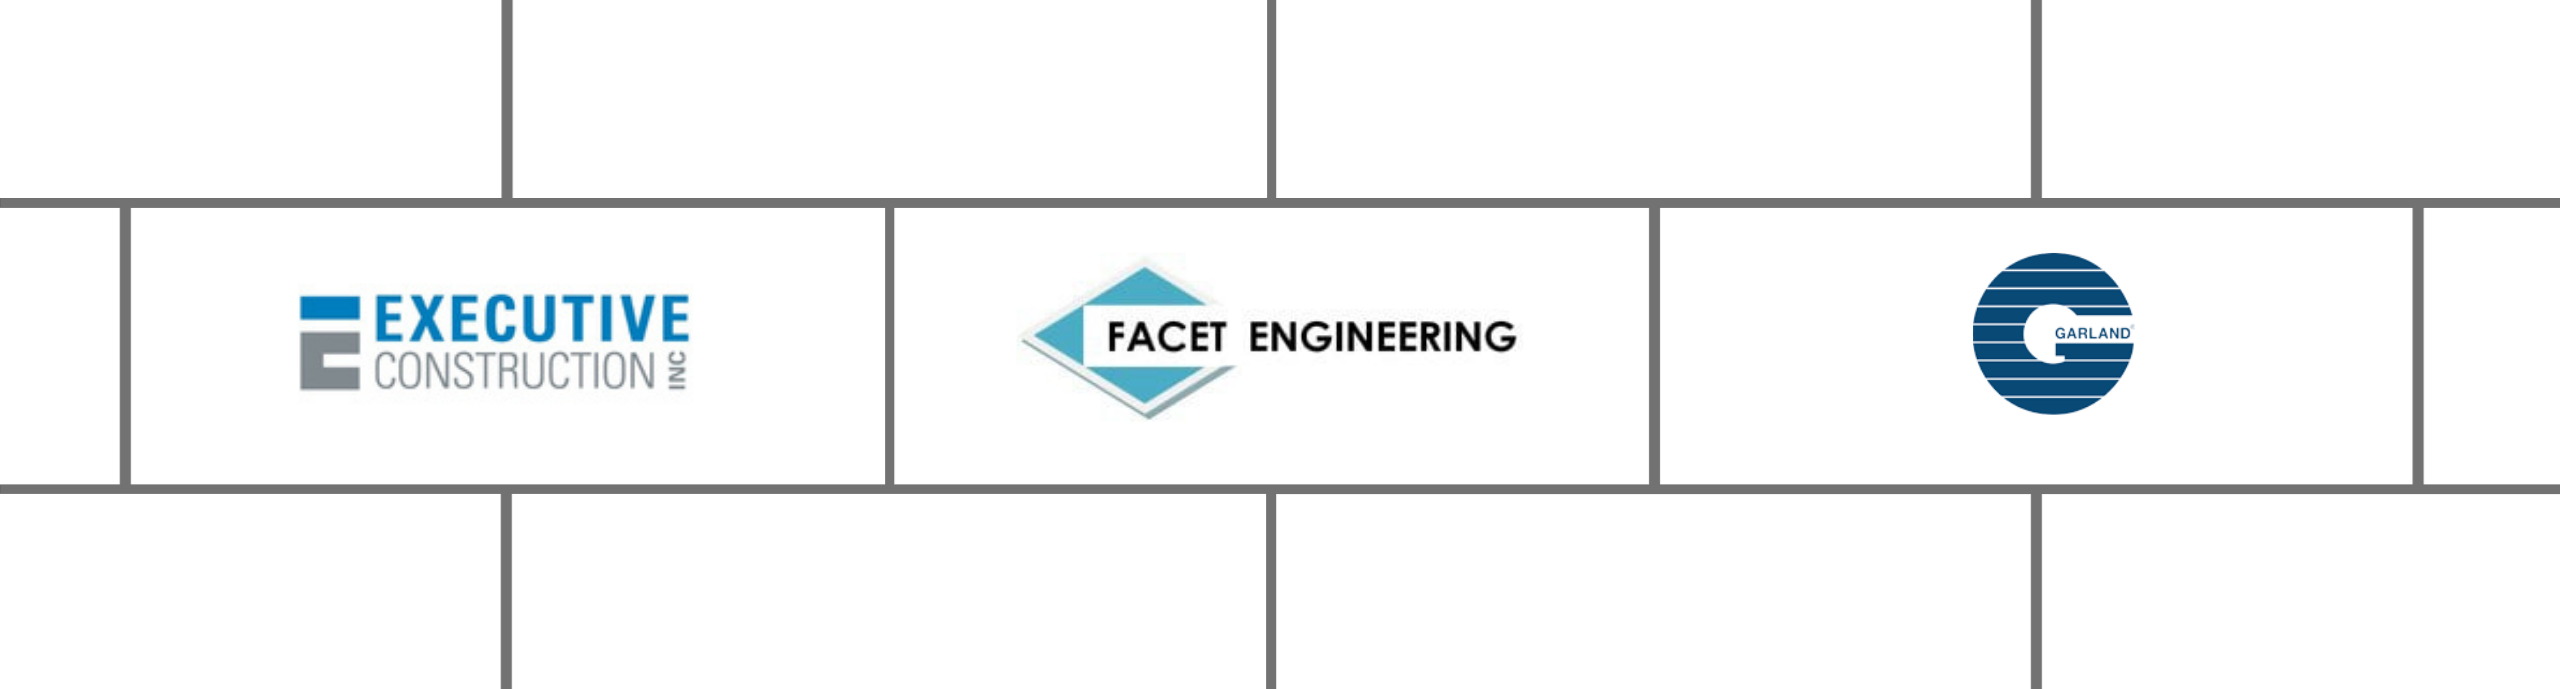 Executive Consulting, Facet Engineering, and Garland Co. logos